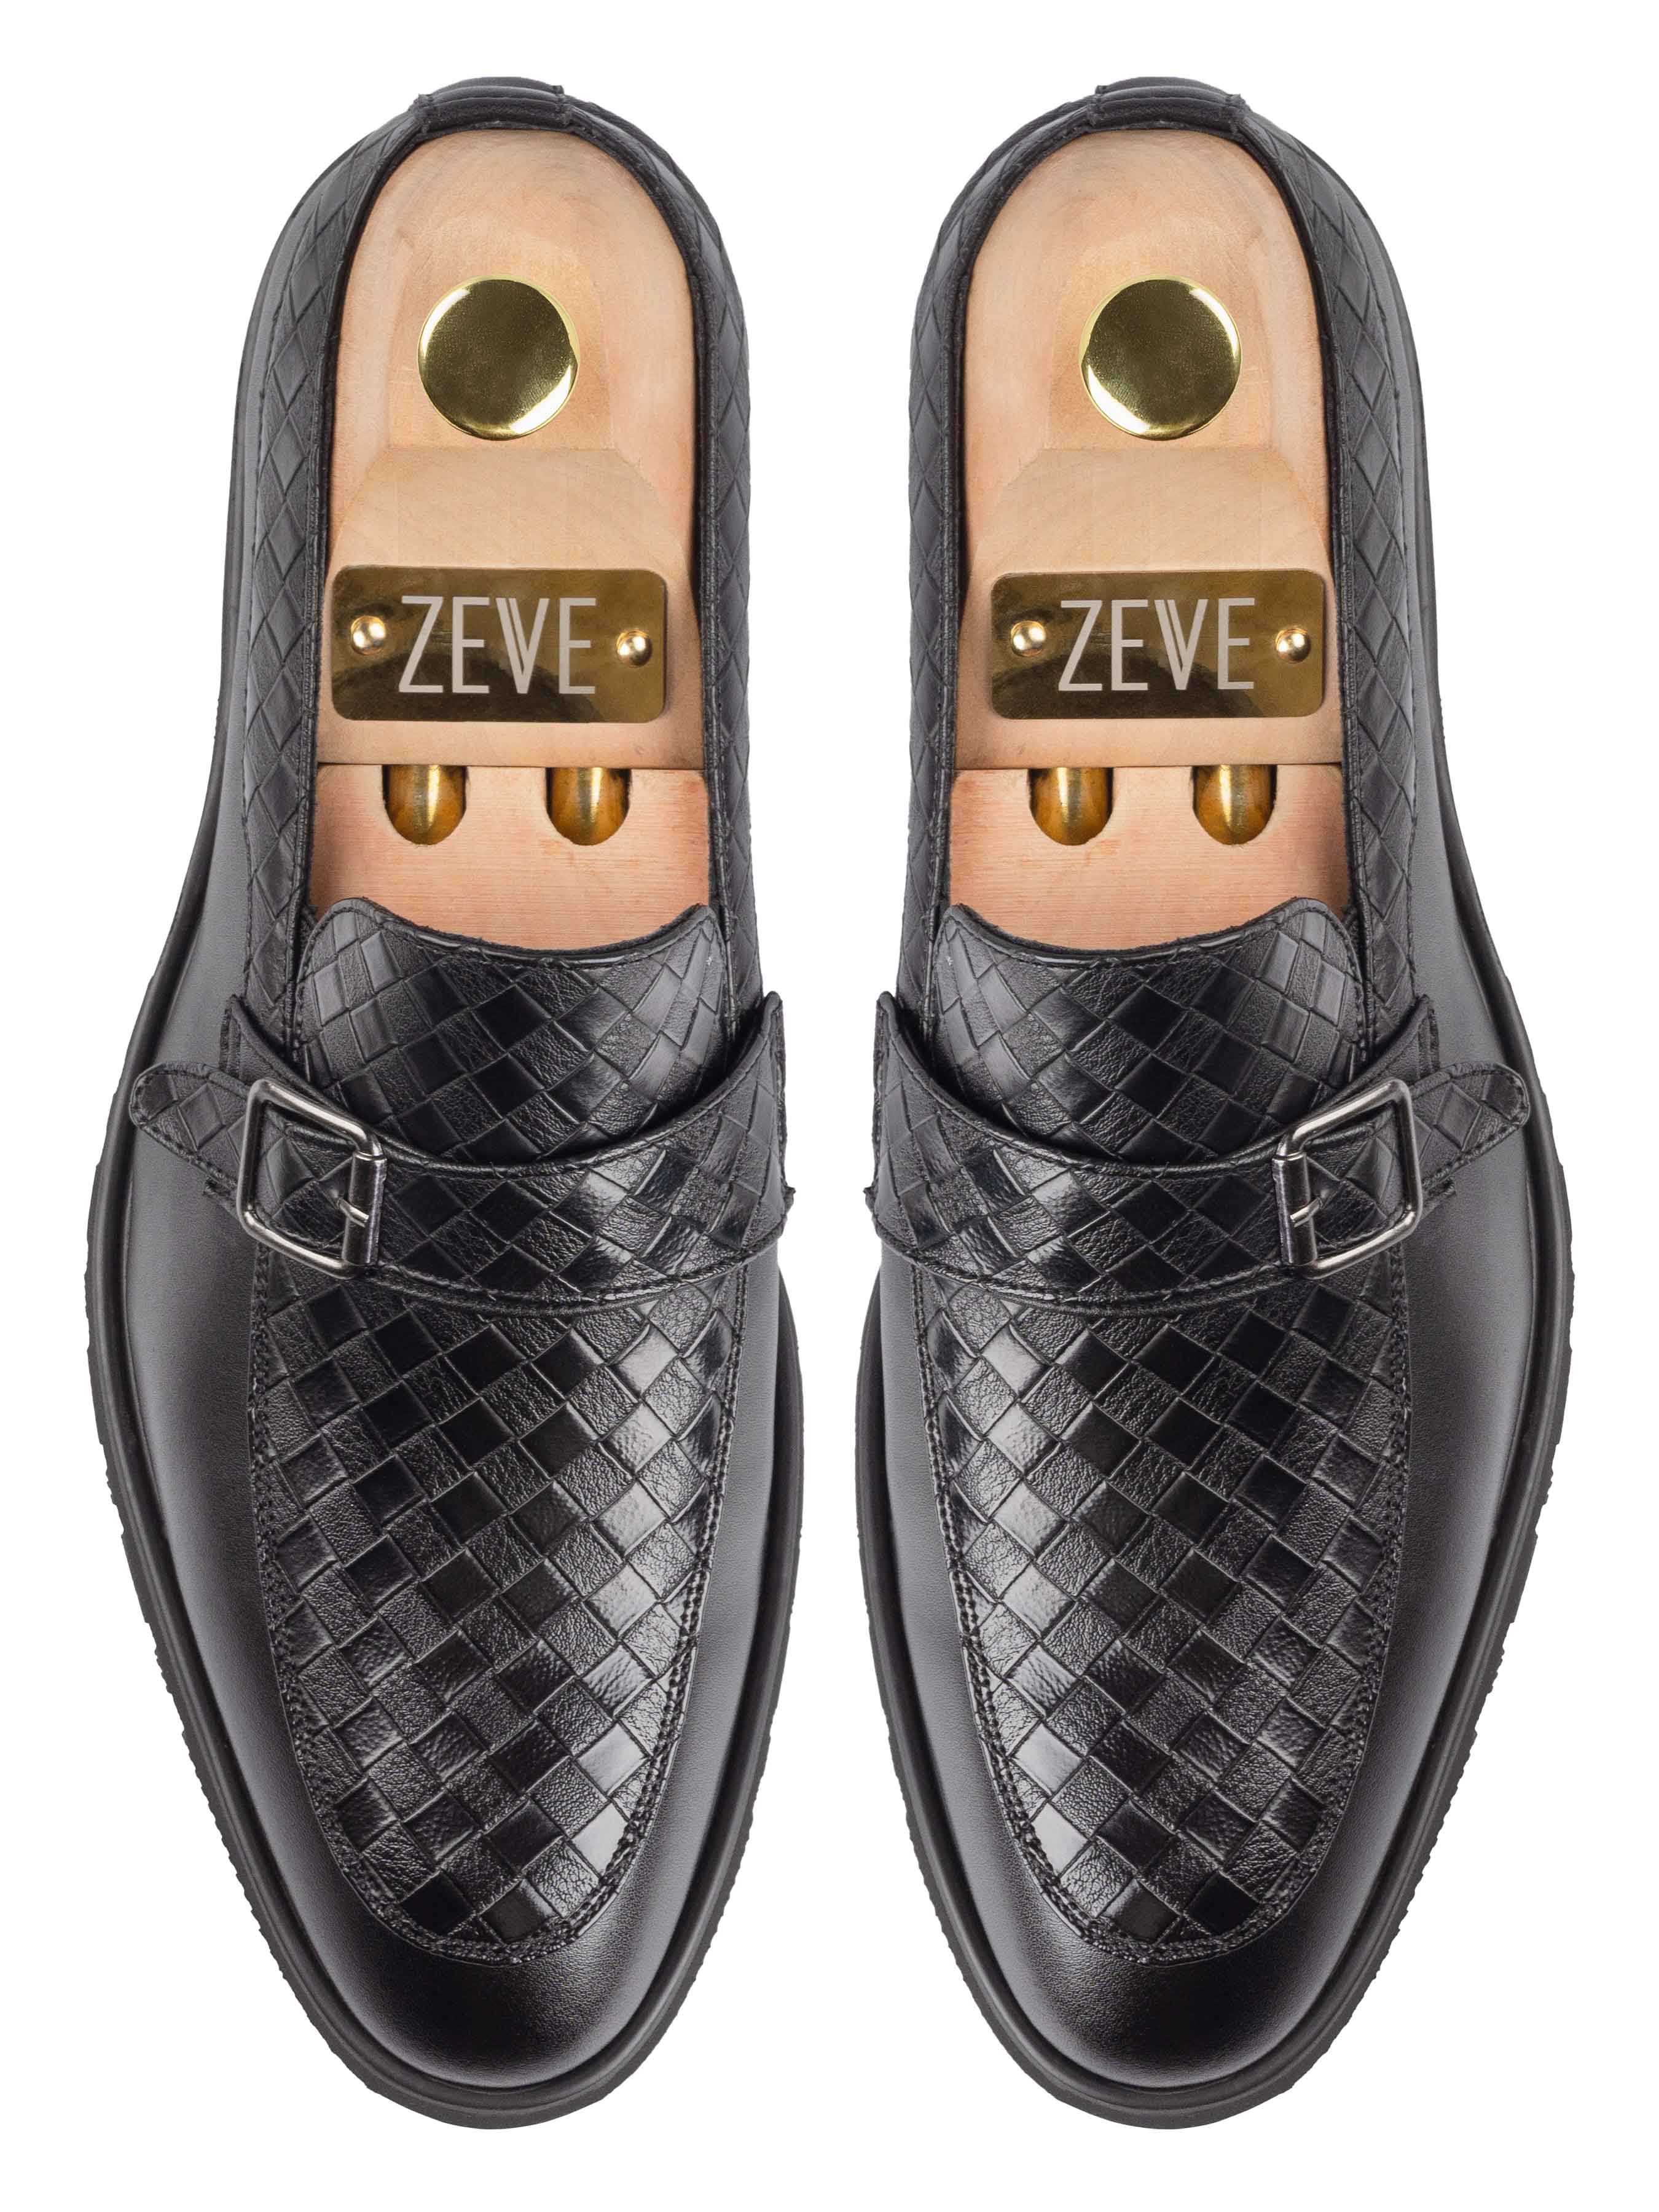 Oliver Single Strap Monk Loafer - Black Woven Leather (Flexi-Sole)